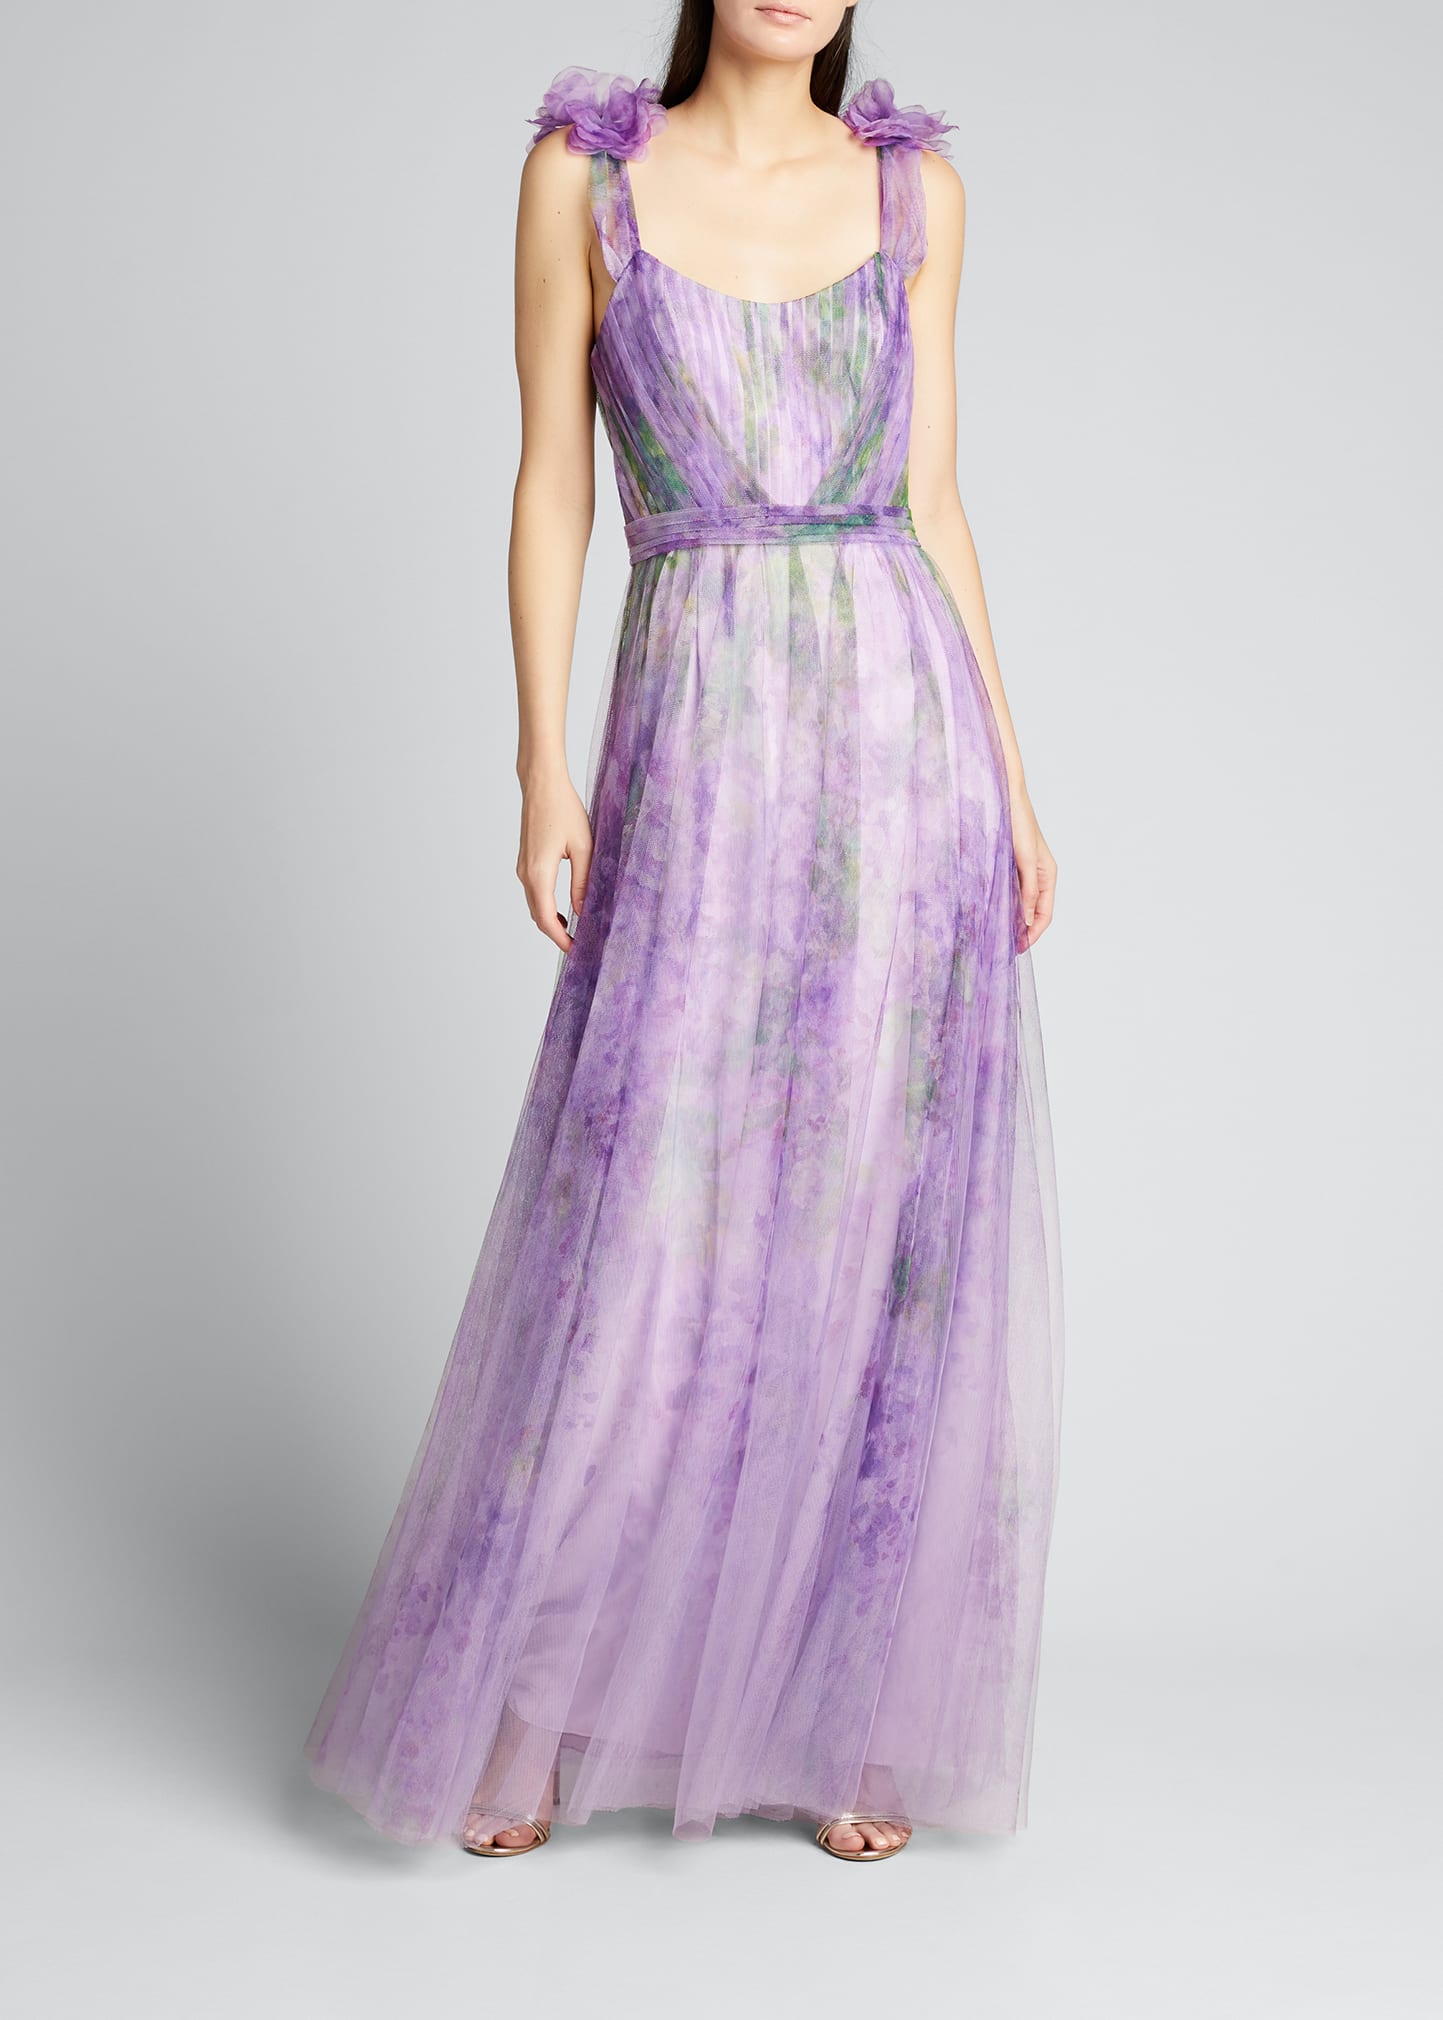 Watercolor Printed Tulle Gown with Draped Bodice